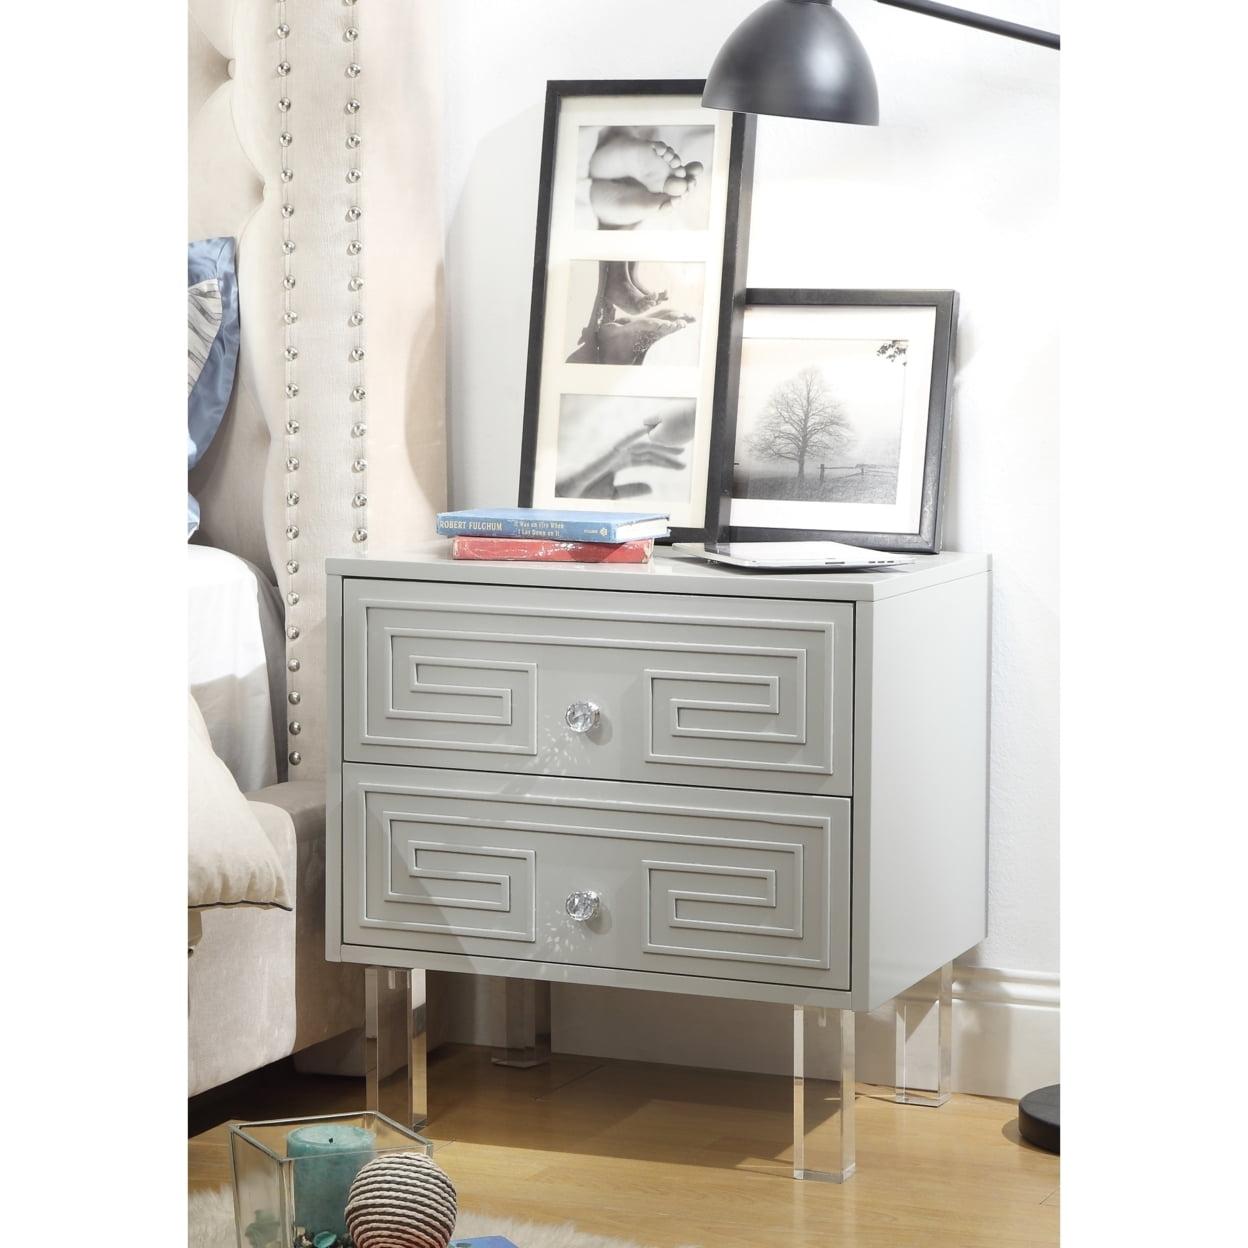 Lottie Light Grey Lacquer Nightstand with Acrylic Lucite Legs